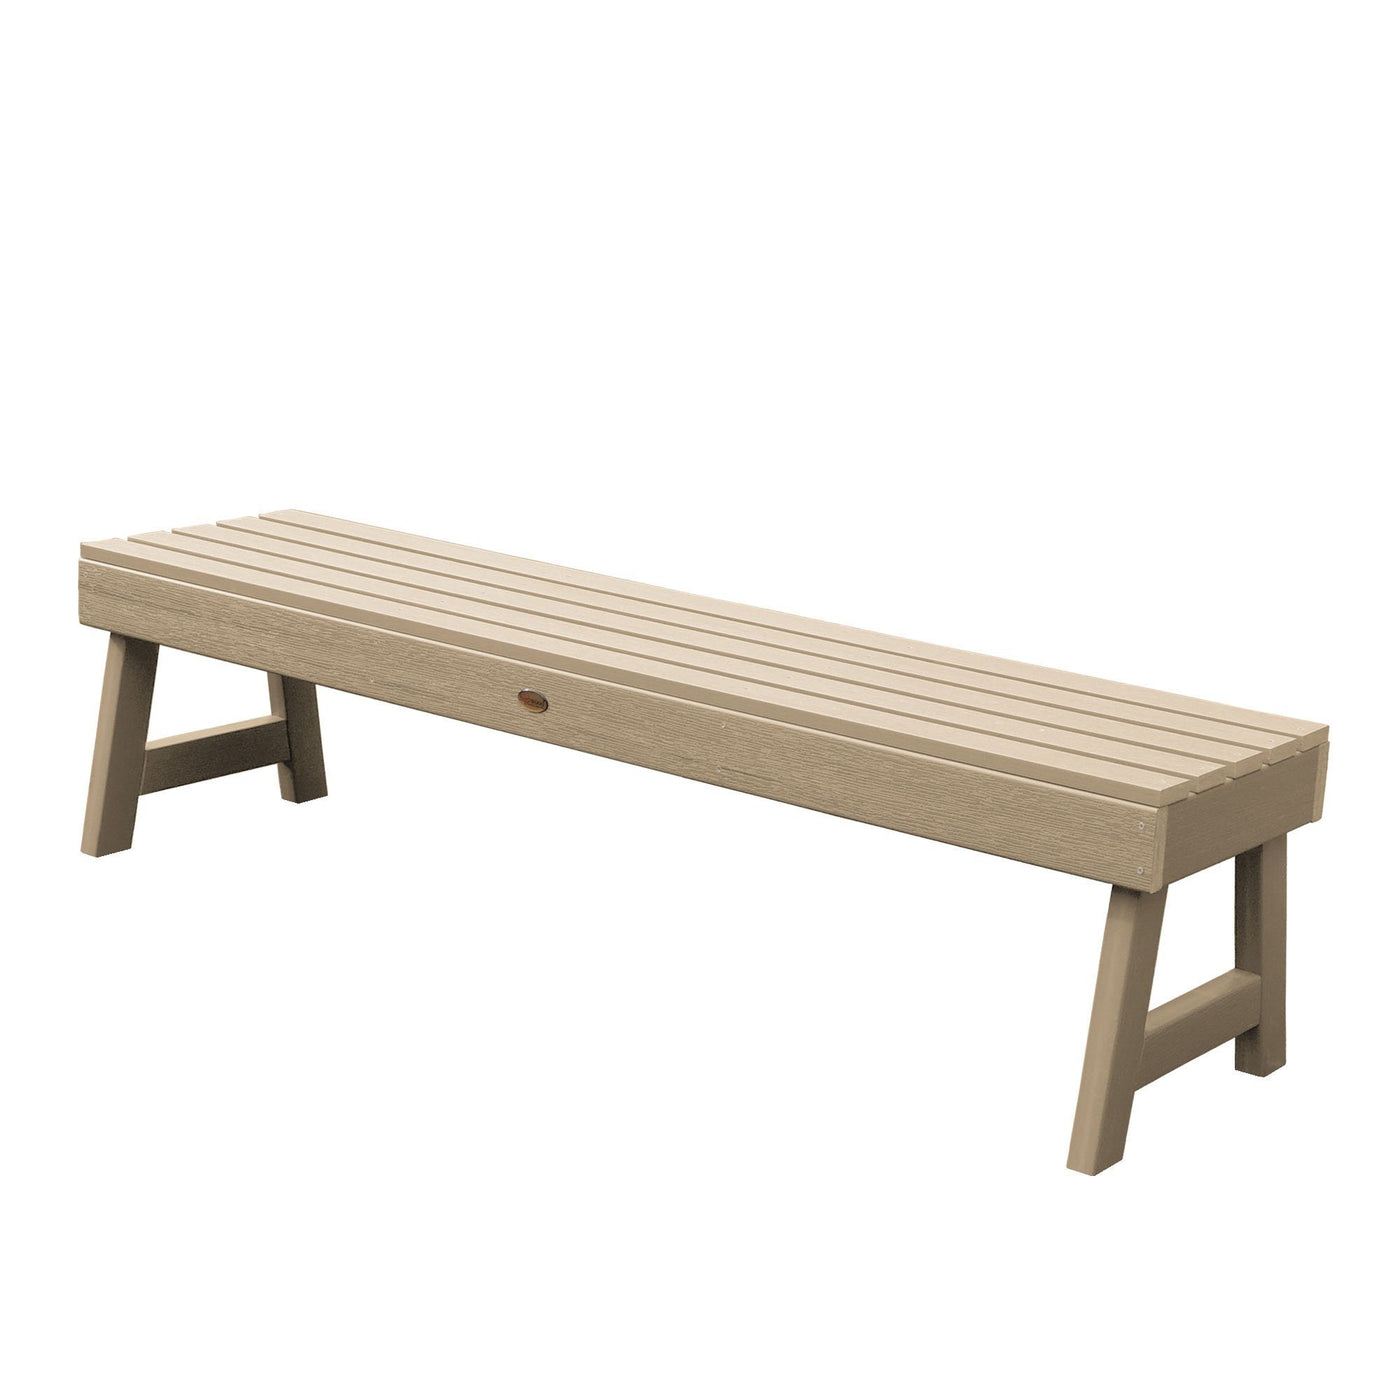 Weatherly Picnic Backless Bench - 5ft BenchSwing Highwood USA Tuscan Taupe 